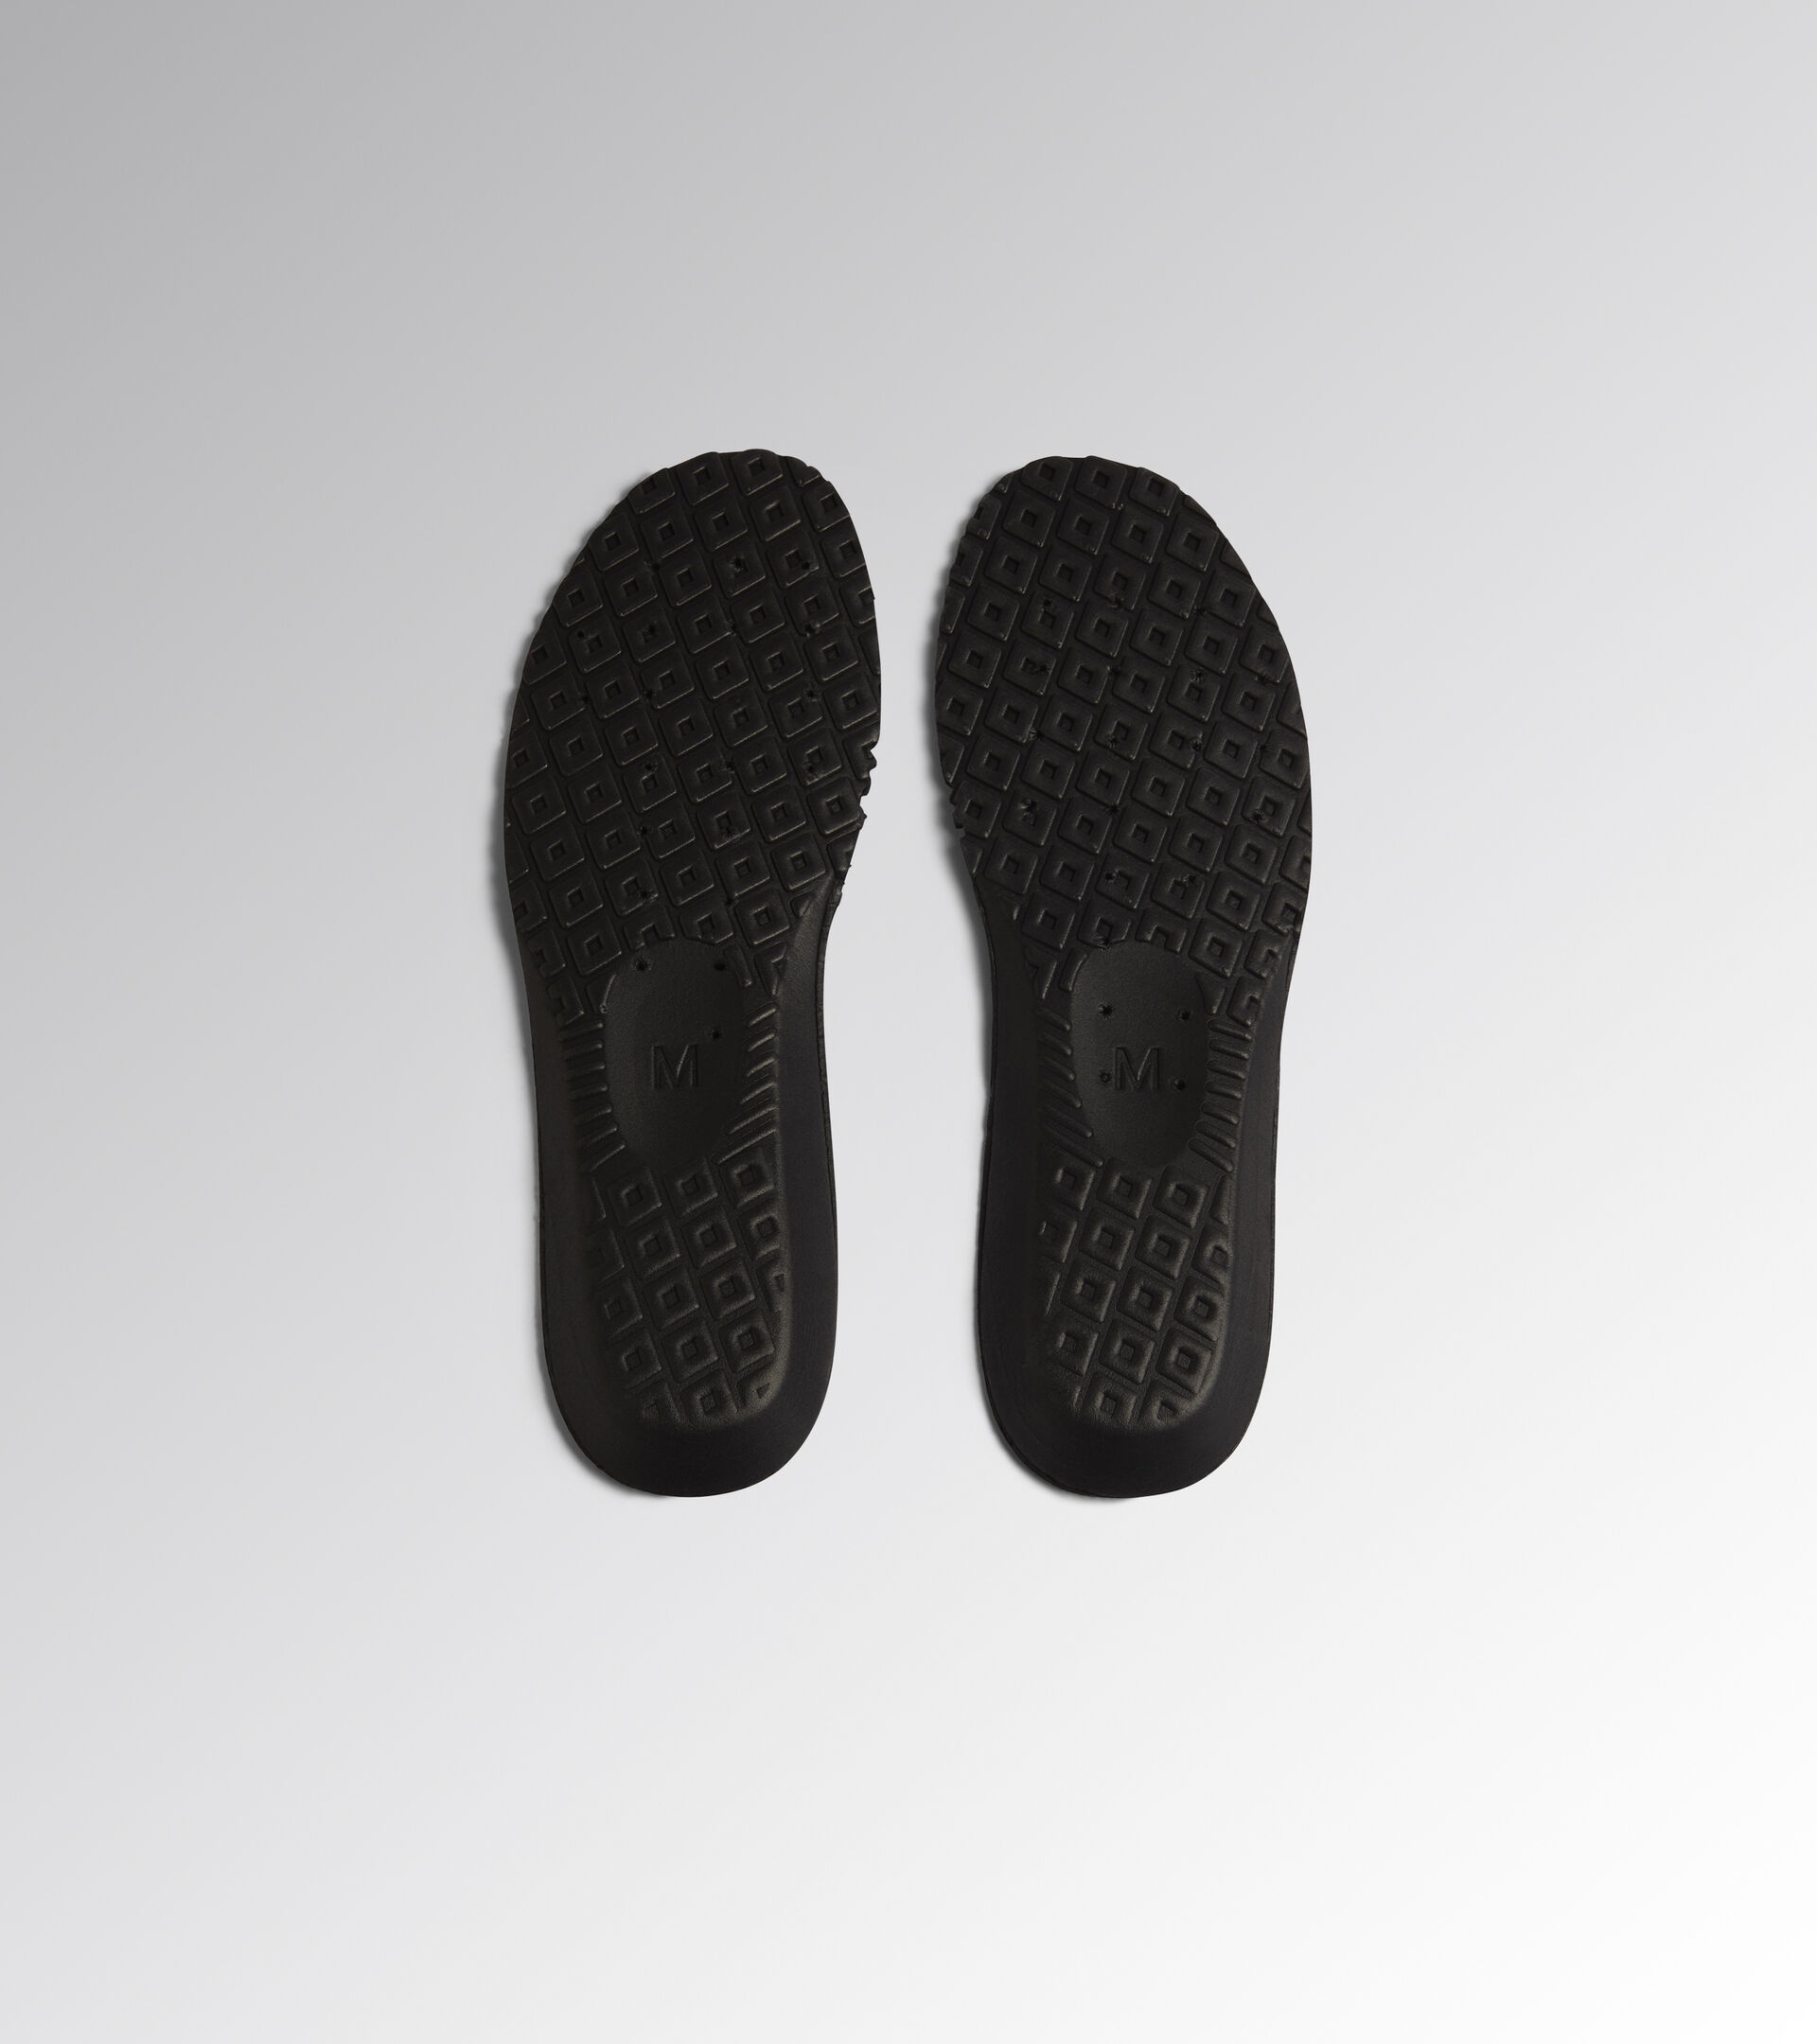 Insoles for Utility shoes INSOLE EVA FORMULA BLACK/YELLOW FLUO UTILITY - Utility